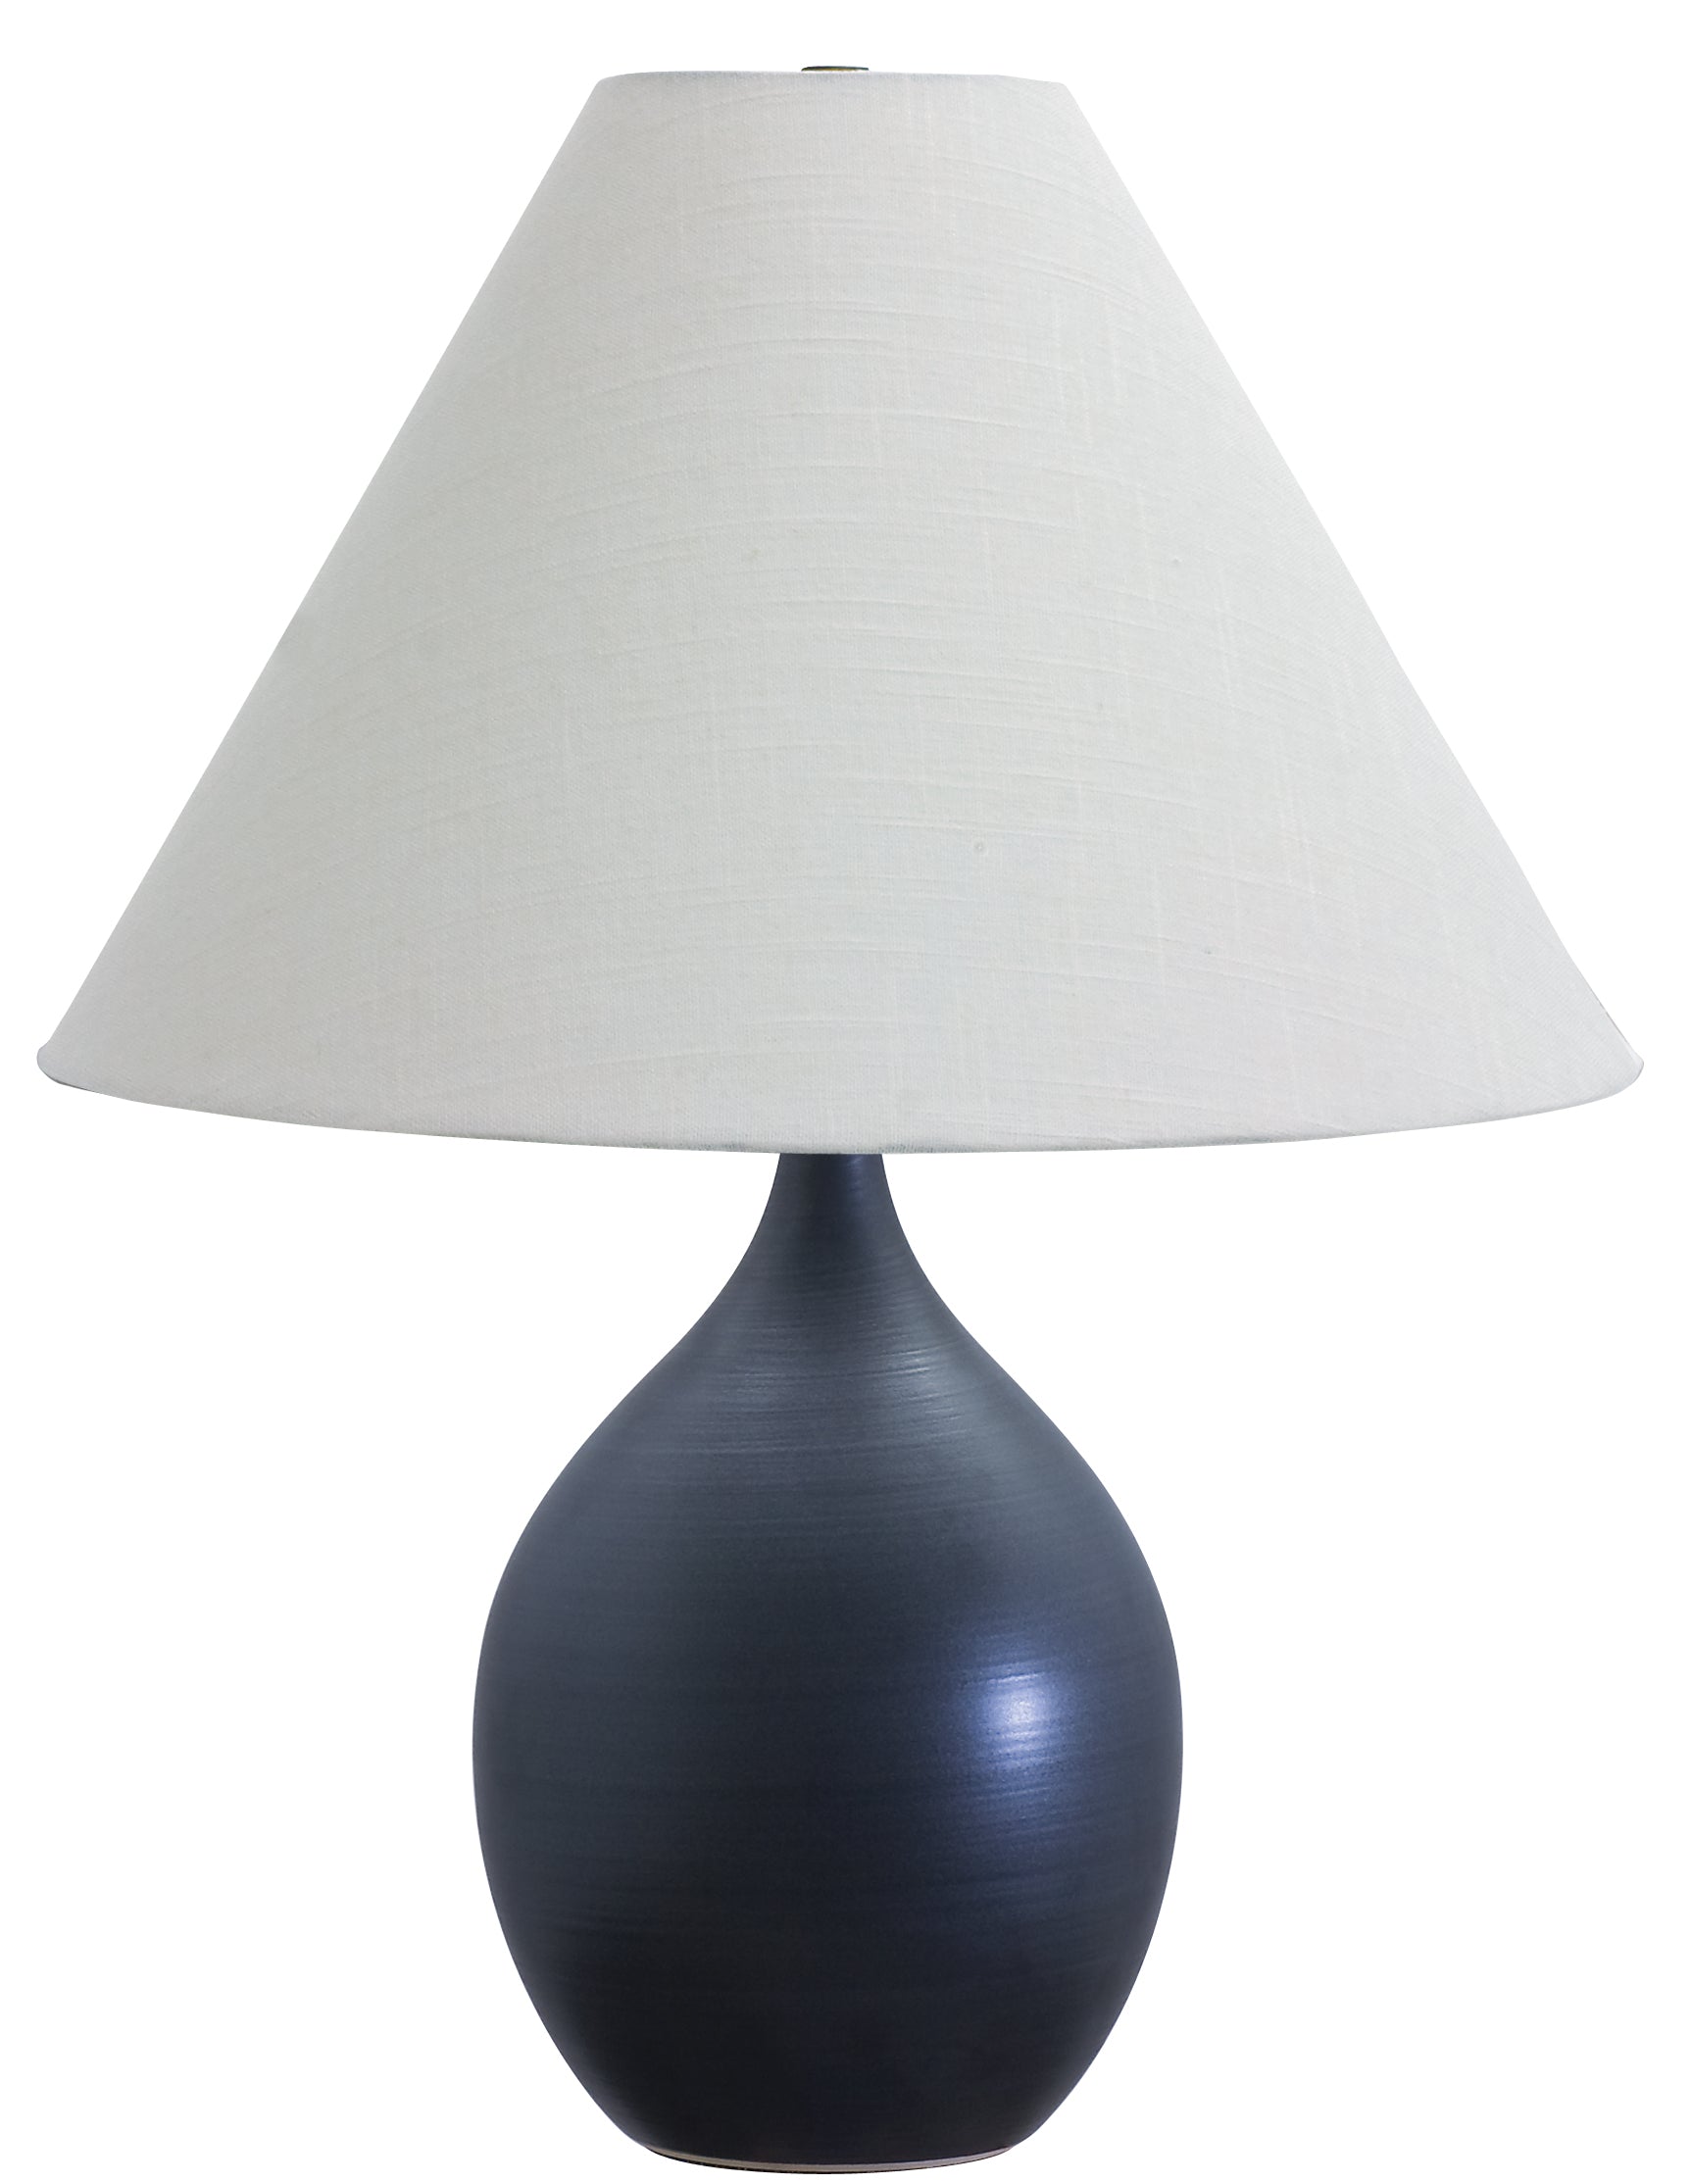 House of Troy Scatchard 22.5" Stoneware Table Lamp in Black Matte GS300-BM